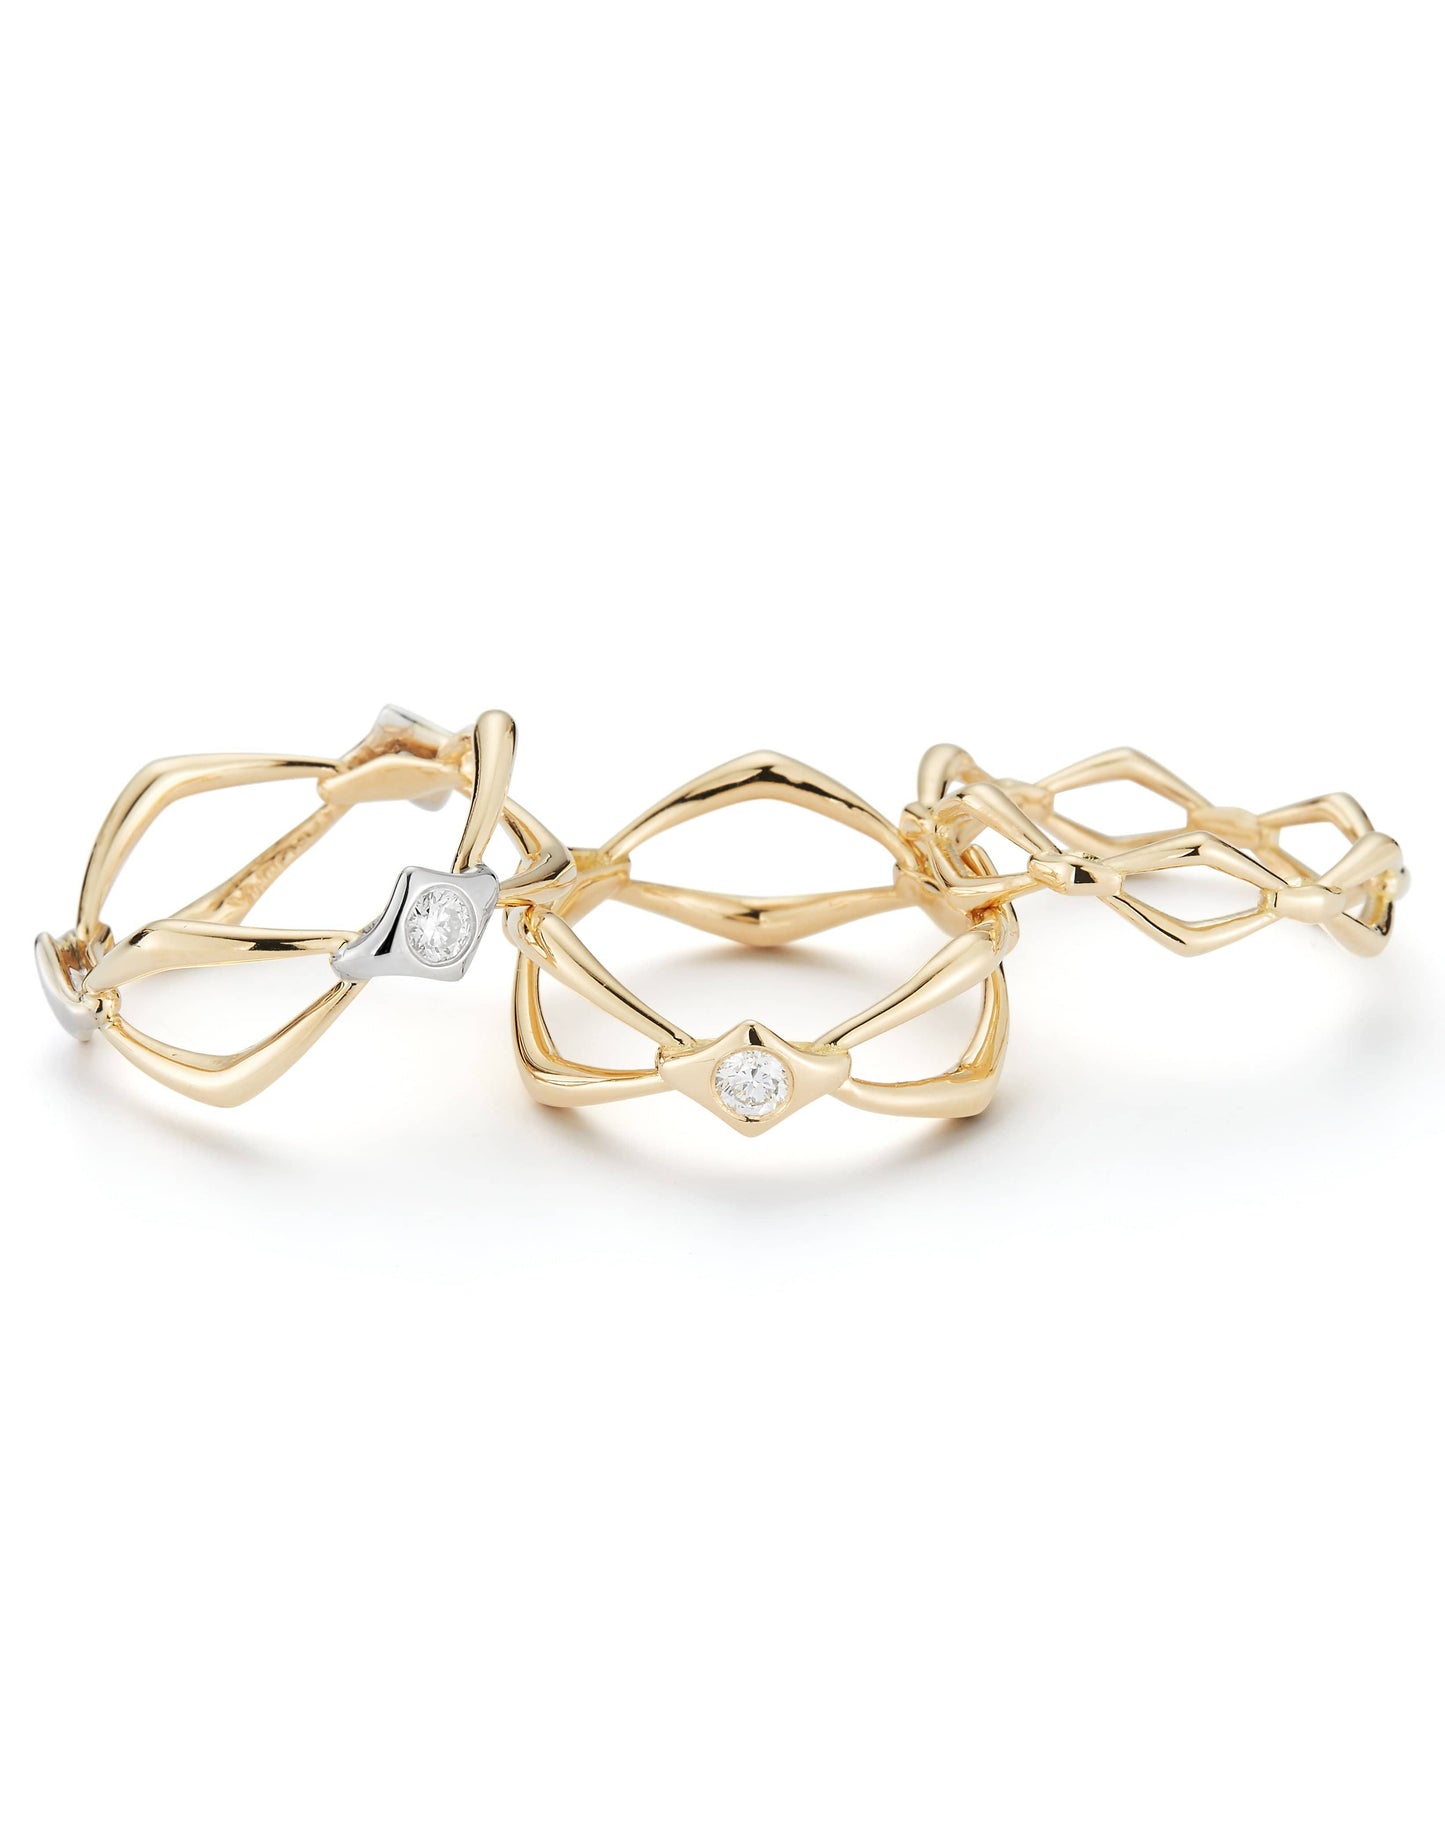 PARULINA-Small Gold Hoops-YELLOW GOLD